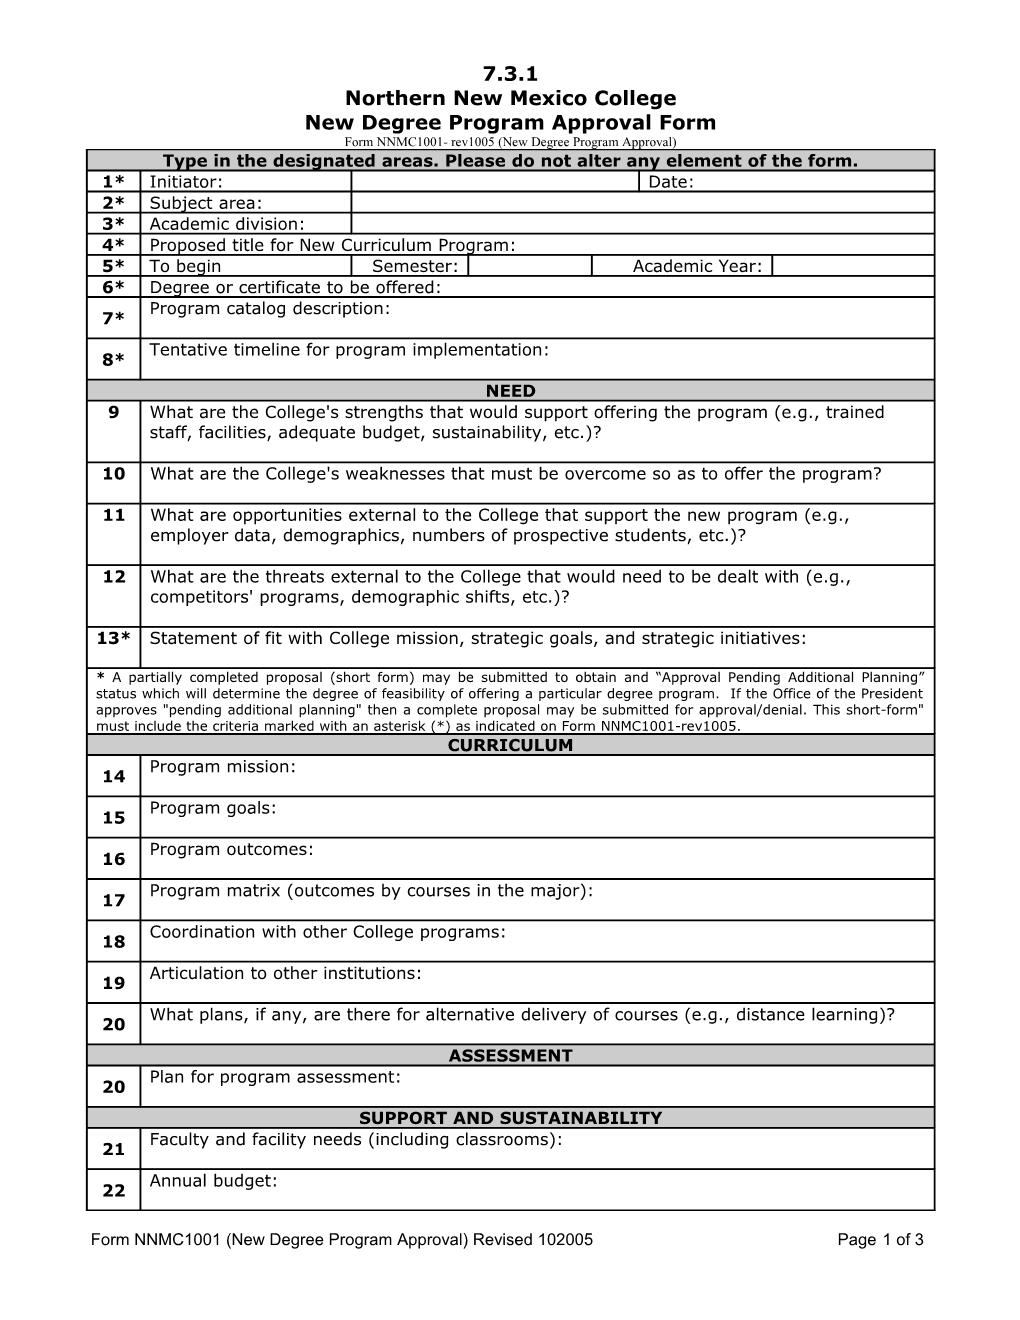 Form NNMC1001 (New Degree Program Approval) Revised 102005 Page 1 of 3